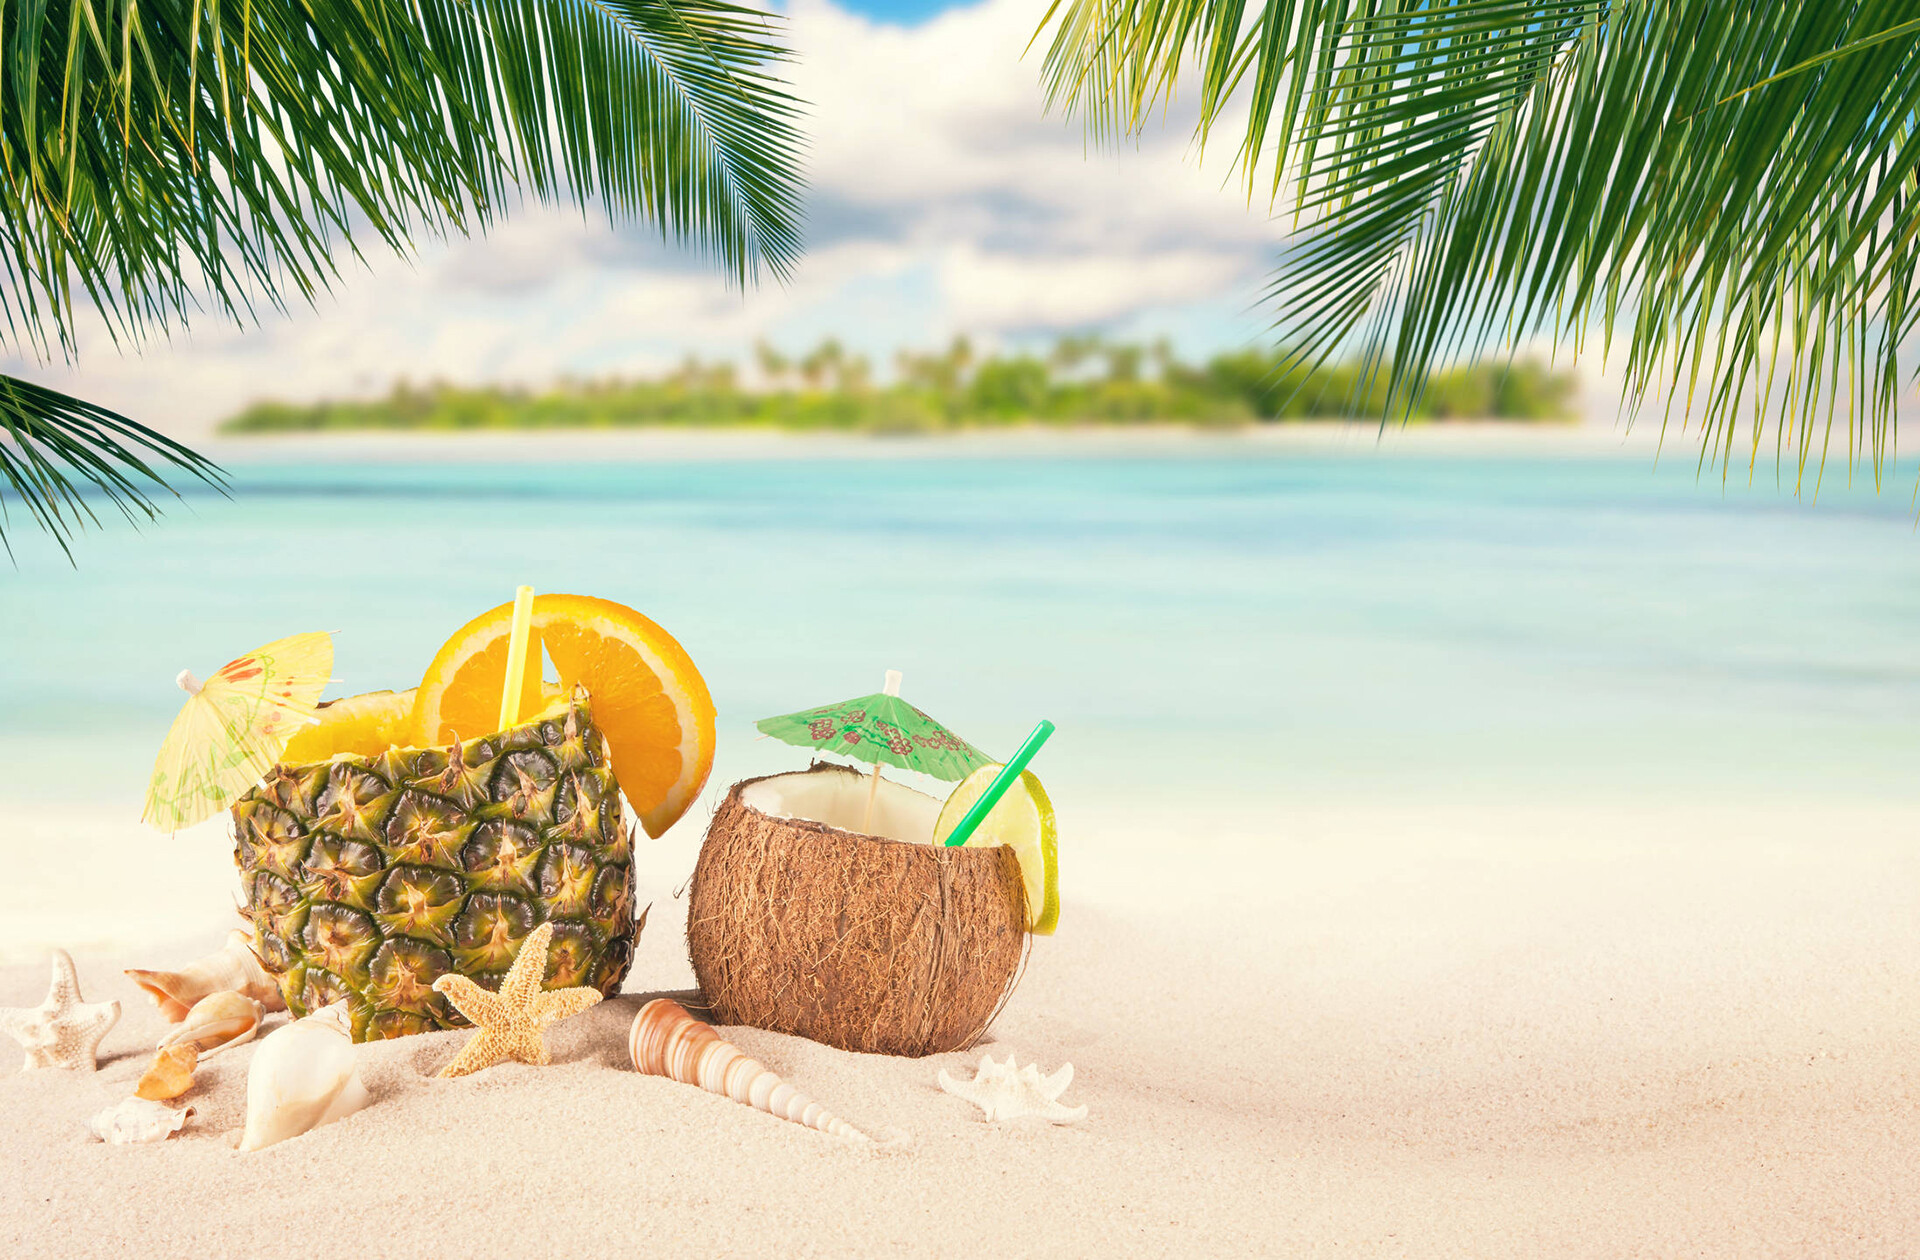 Summer: Midsummer, The best time to rest, Tropical islands for beach vacation. 1920x1260 HD Wallpaper.